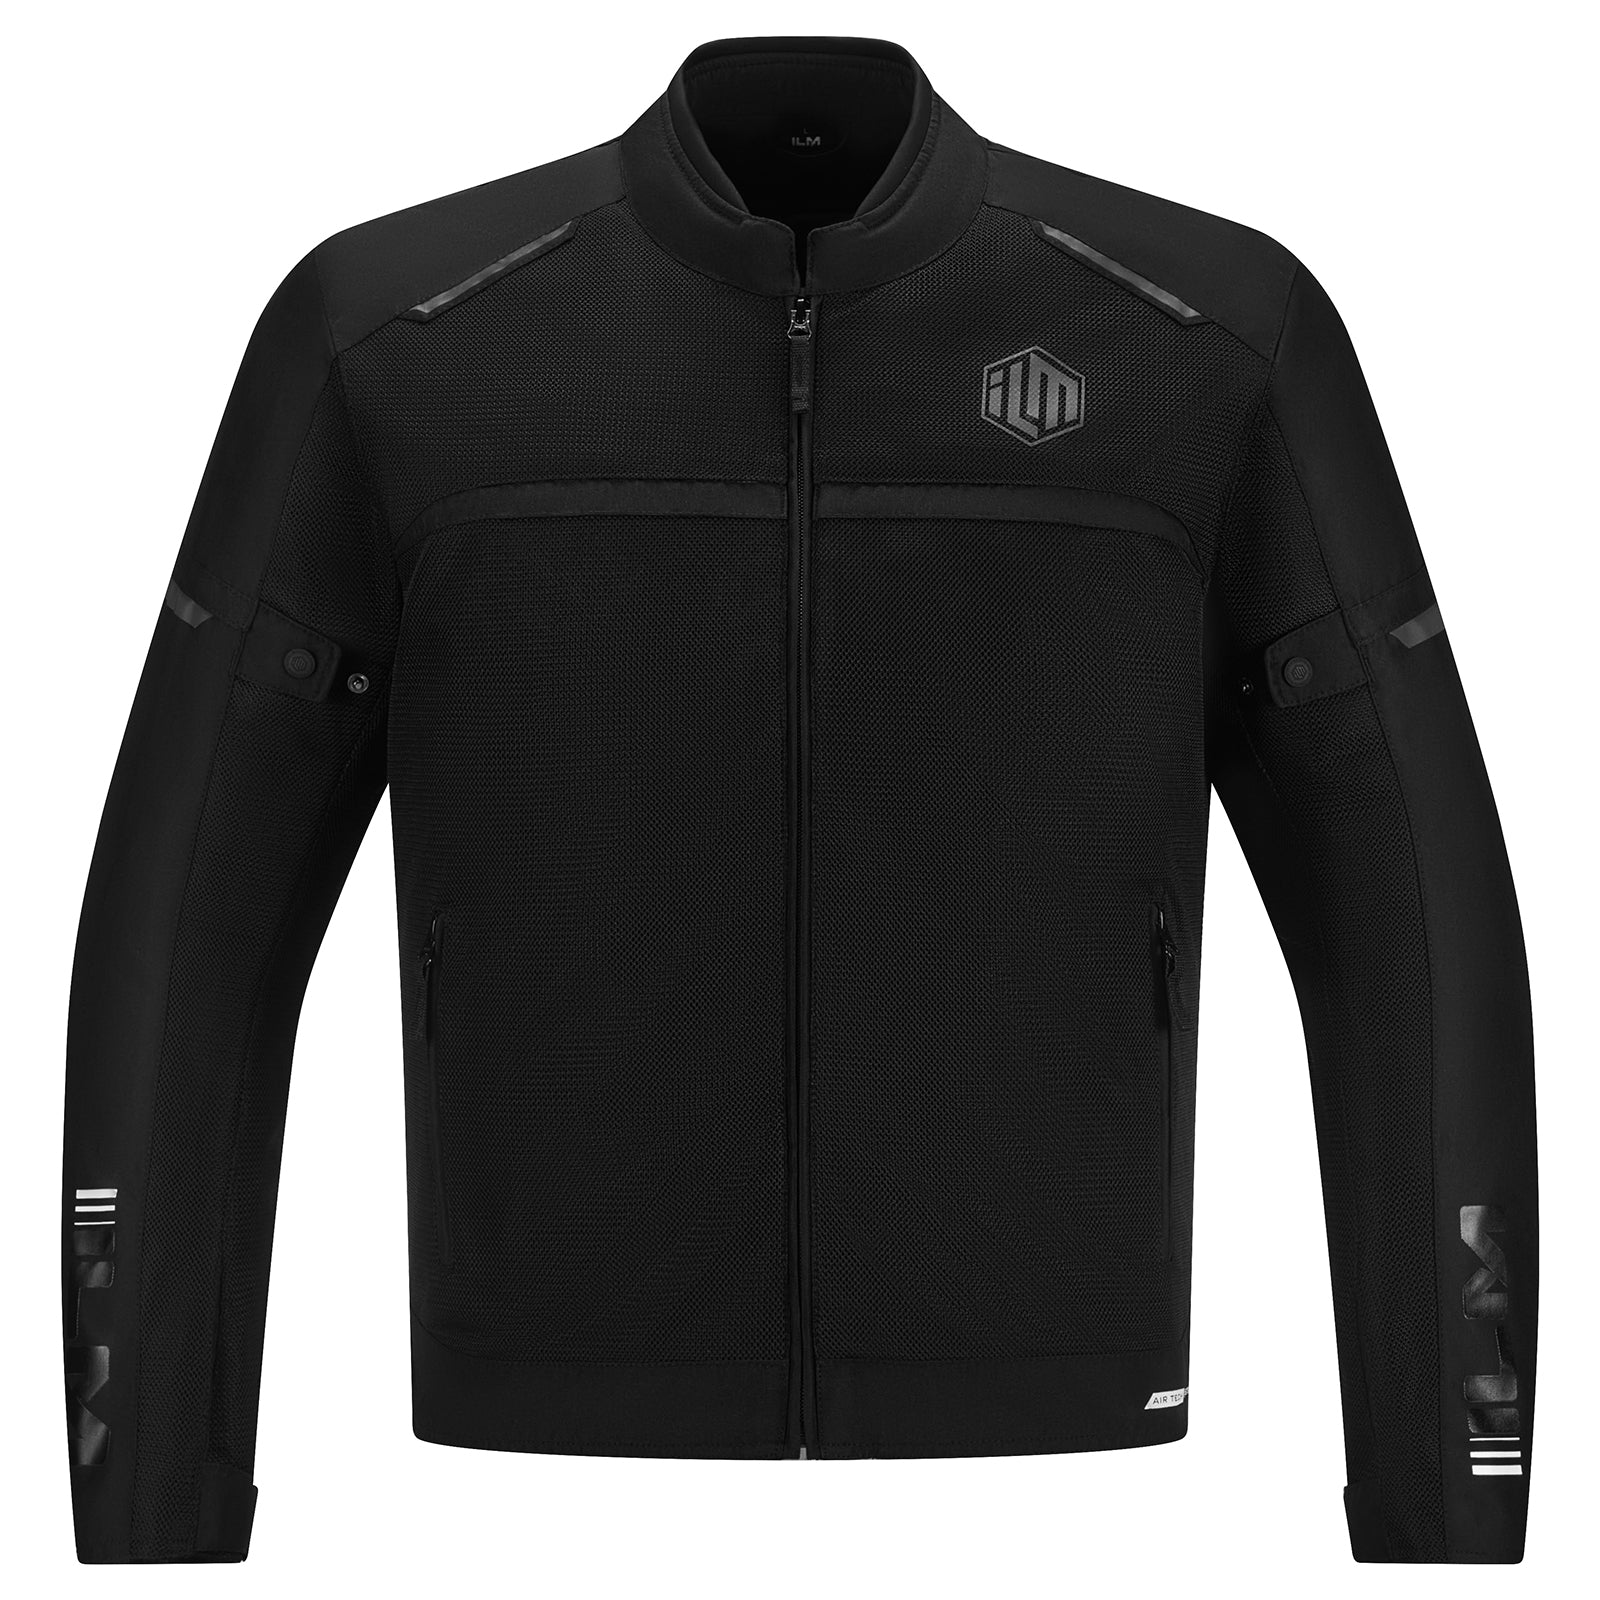 ILM Motorcycle Riding Jacket with Mesh CE Armor Dual Sport Protective Model JAM1